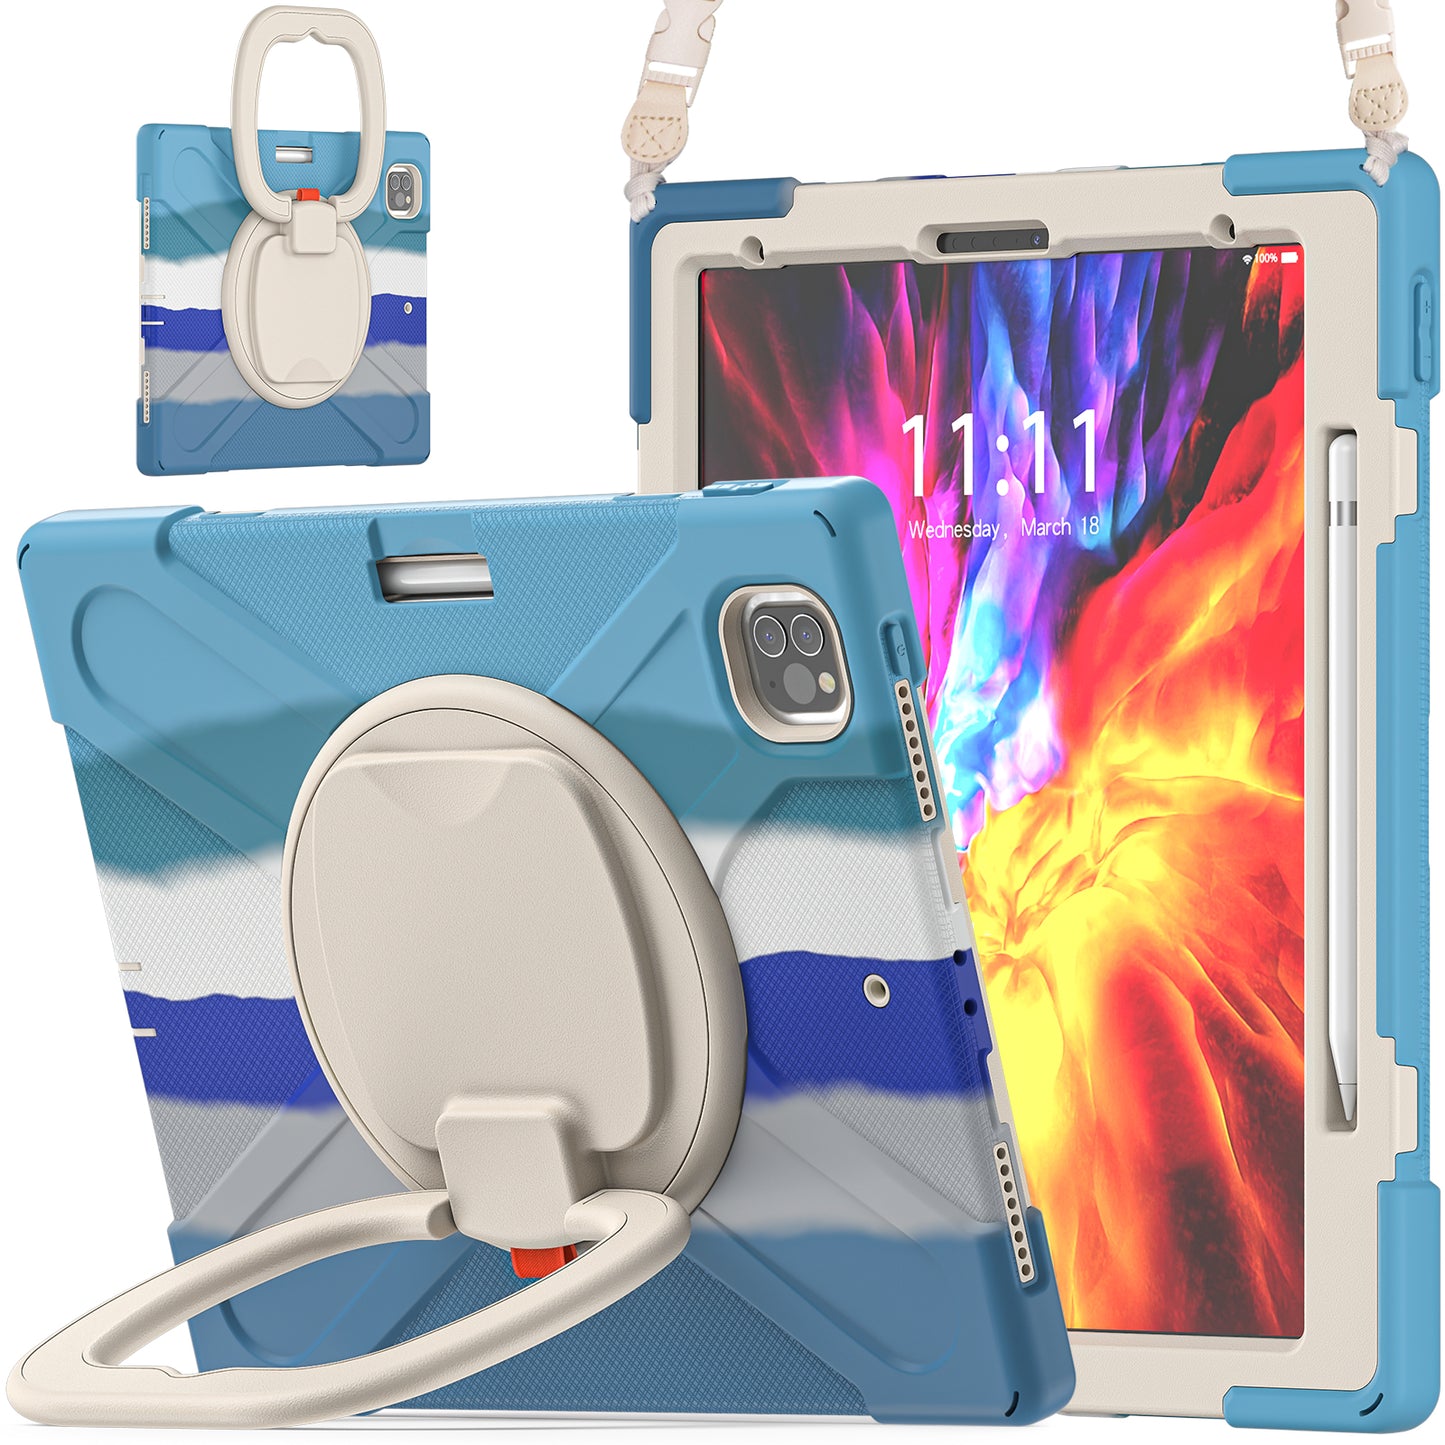 Pirate Box iPad Pro 11 (2018) Case Hook Stand Rotating Hand Holder Shoulder Strap